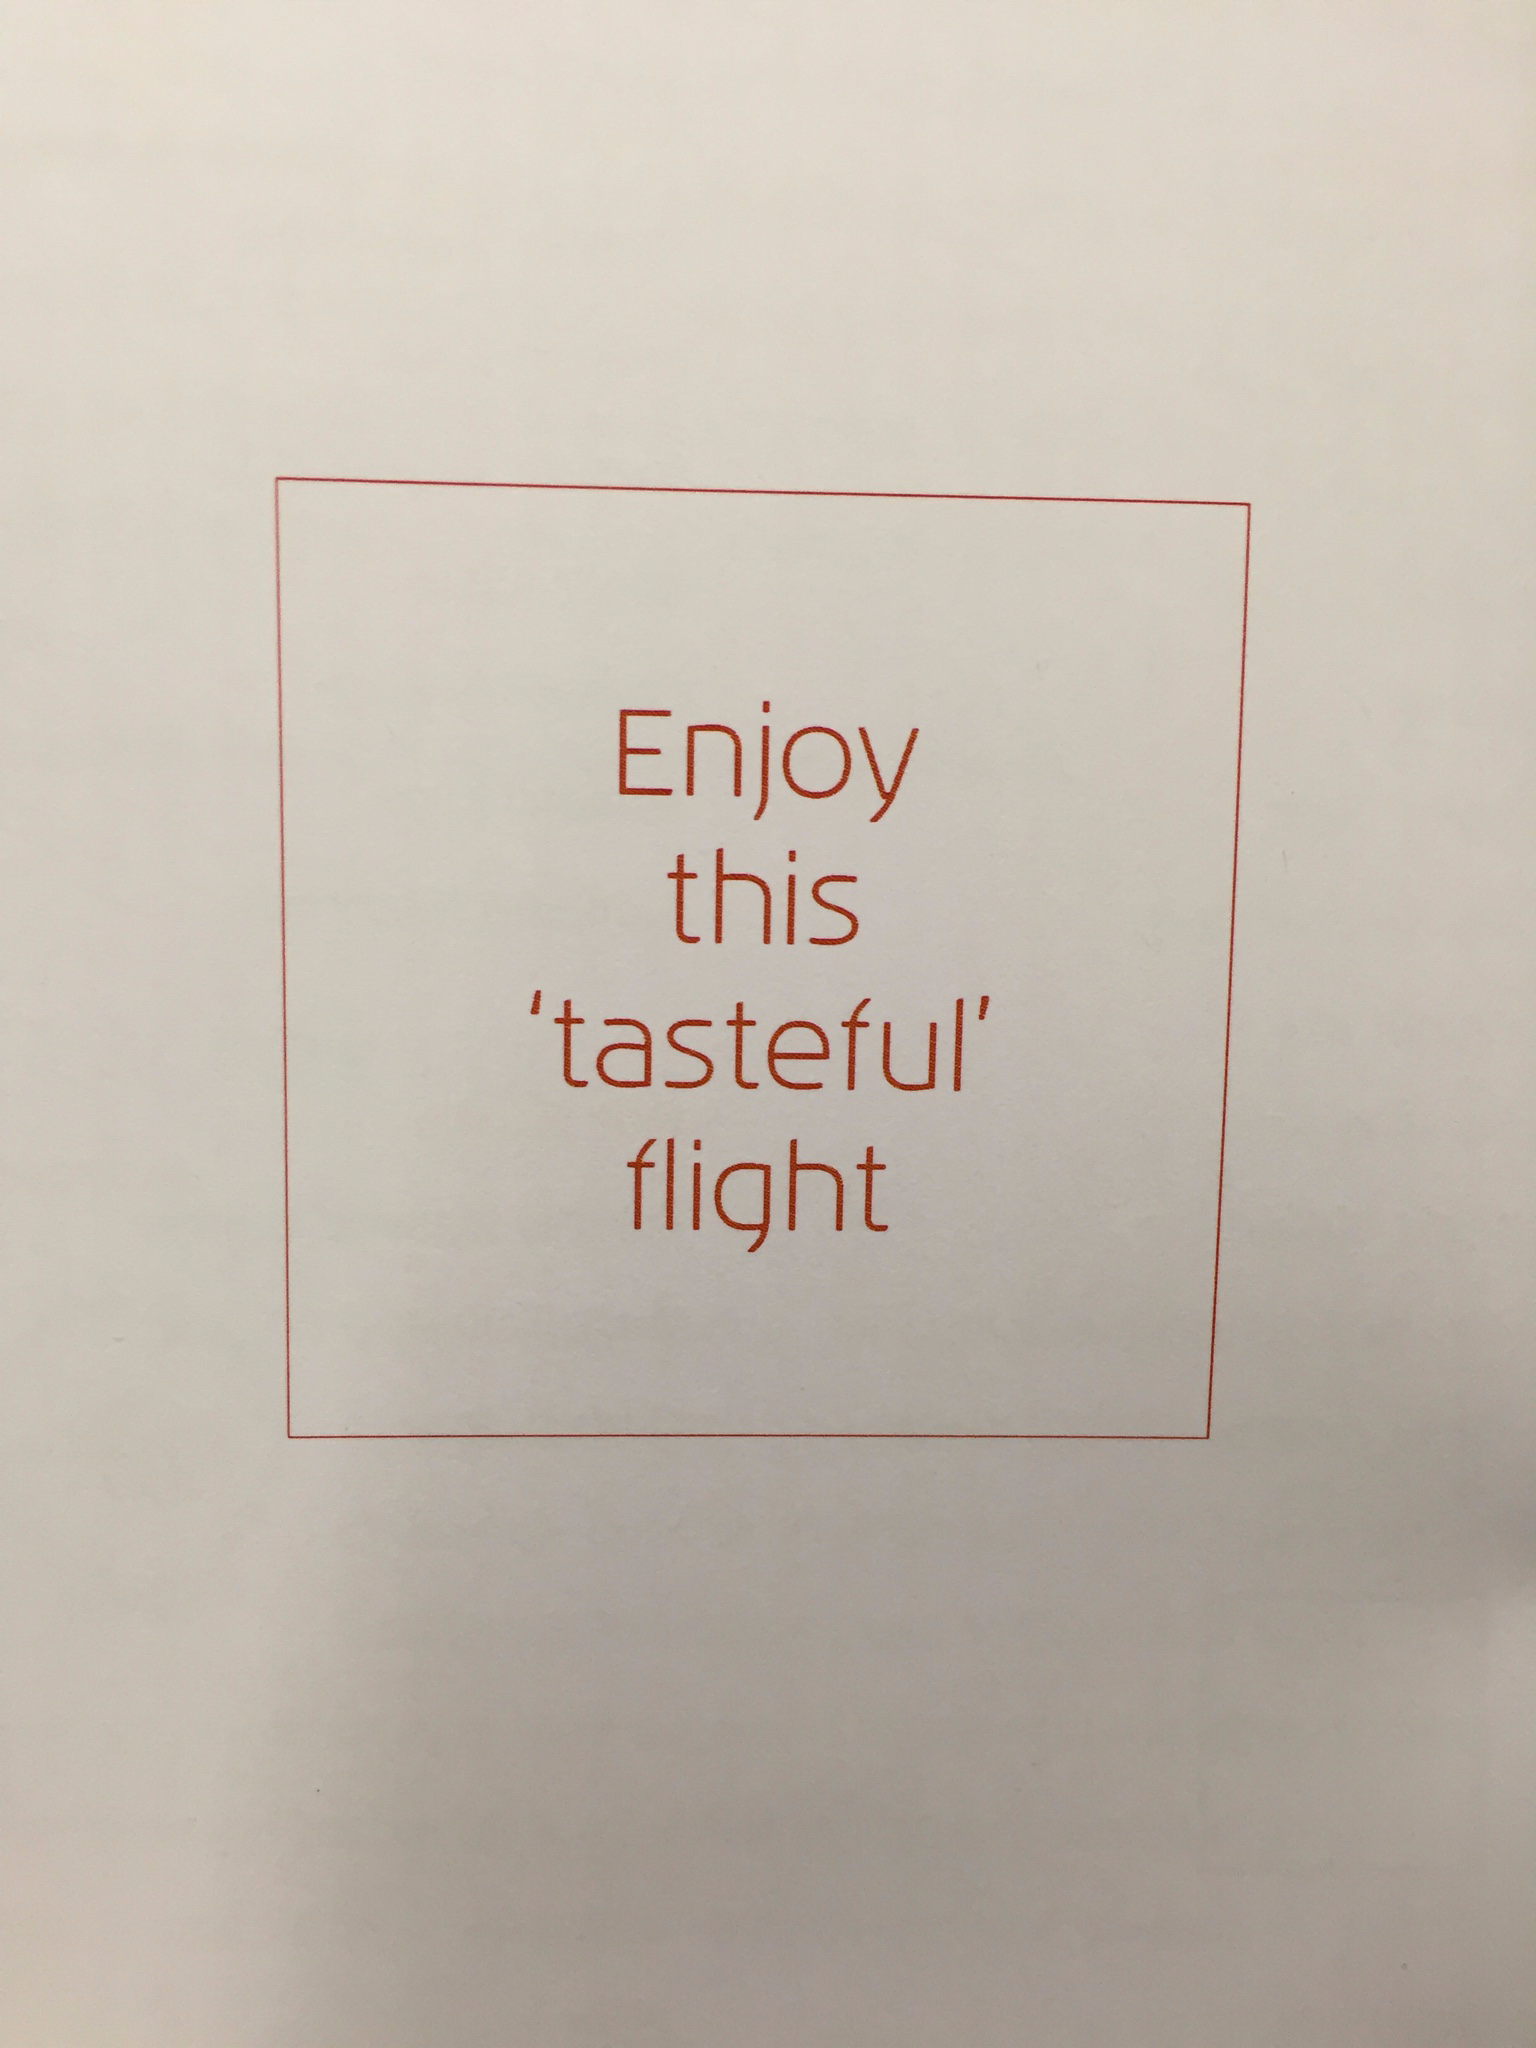 Why is "tasteful" in quotes??!